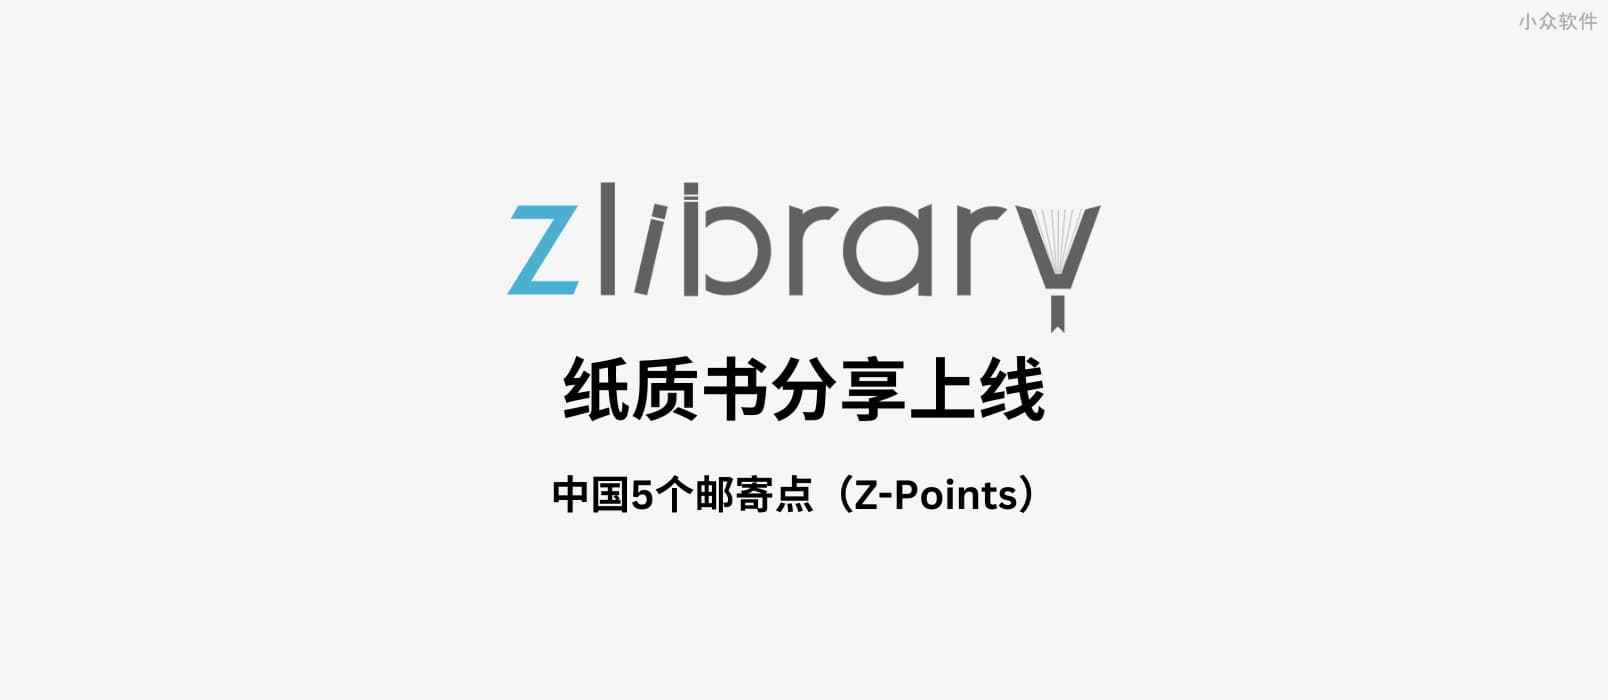 Z-Library 又搞事情：Z-Points - 提供纸质书籍分享，中国5个点